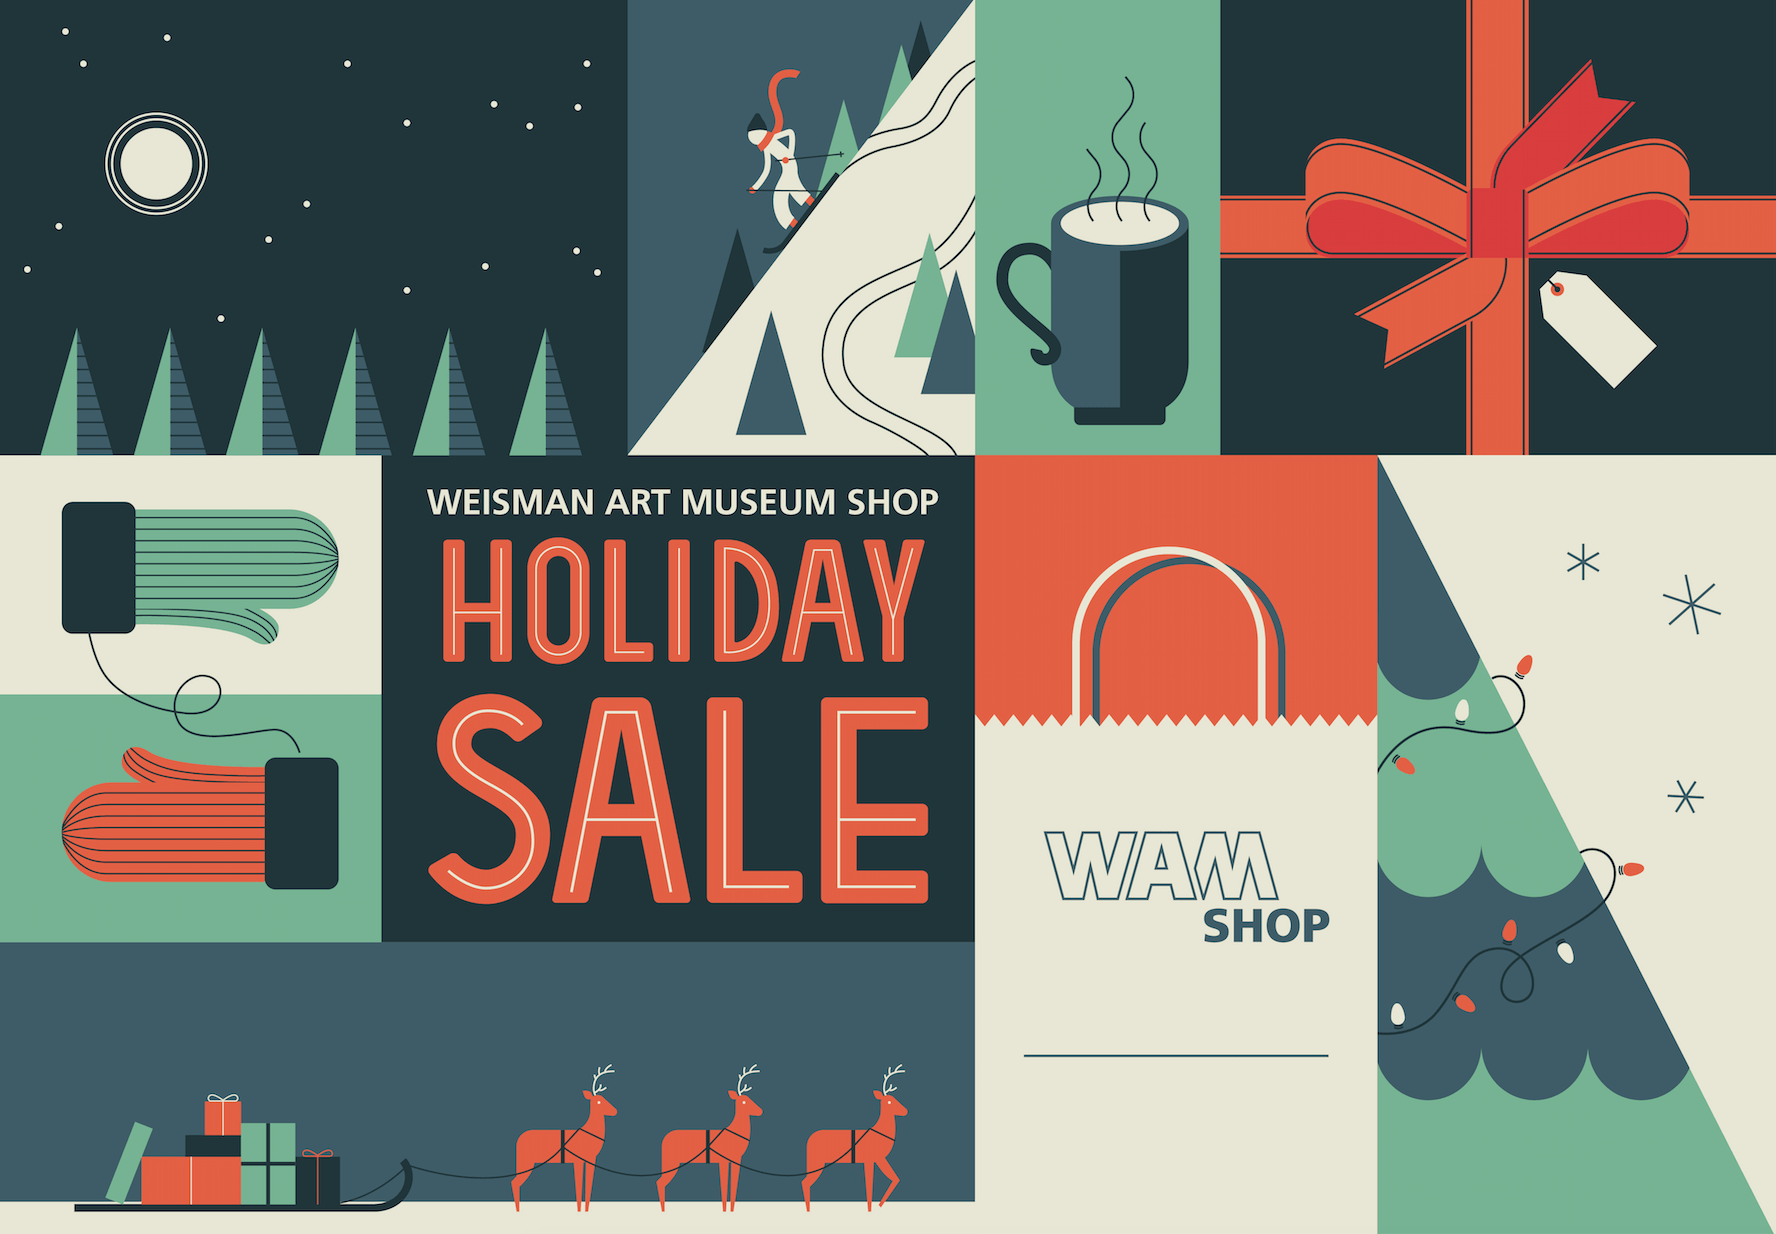 text "Weisman Art Museum Shop Holiday Sale" surrounded by mittens, santa's sleigh, snowy sky, person skiing, mug of hot coco, wrapped present, and gift bag